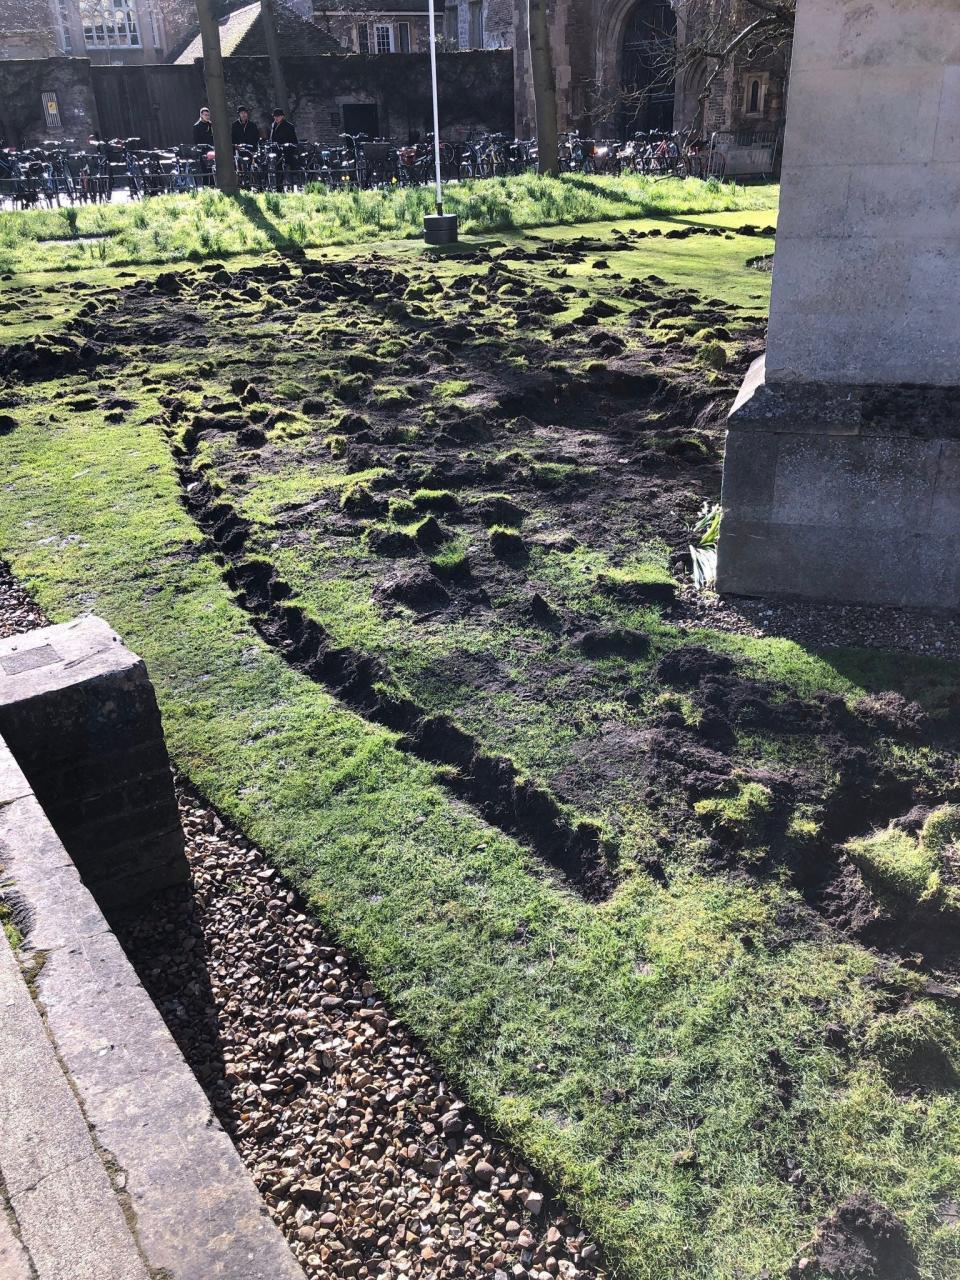 The digging ruined the lawn (PA)